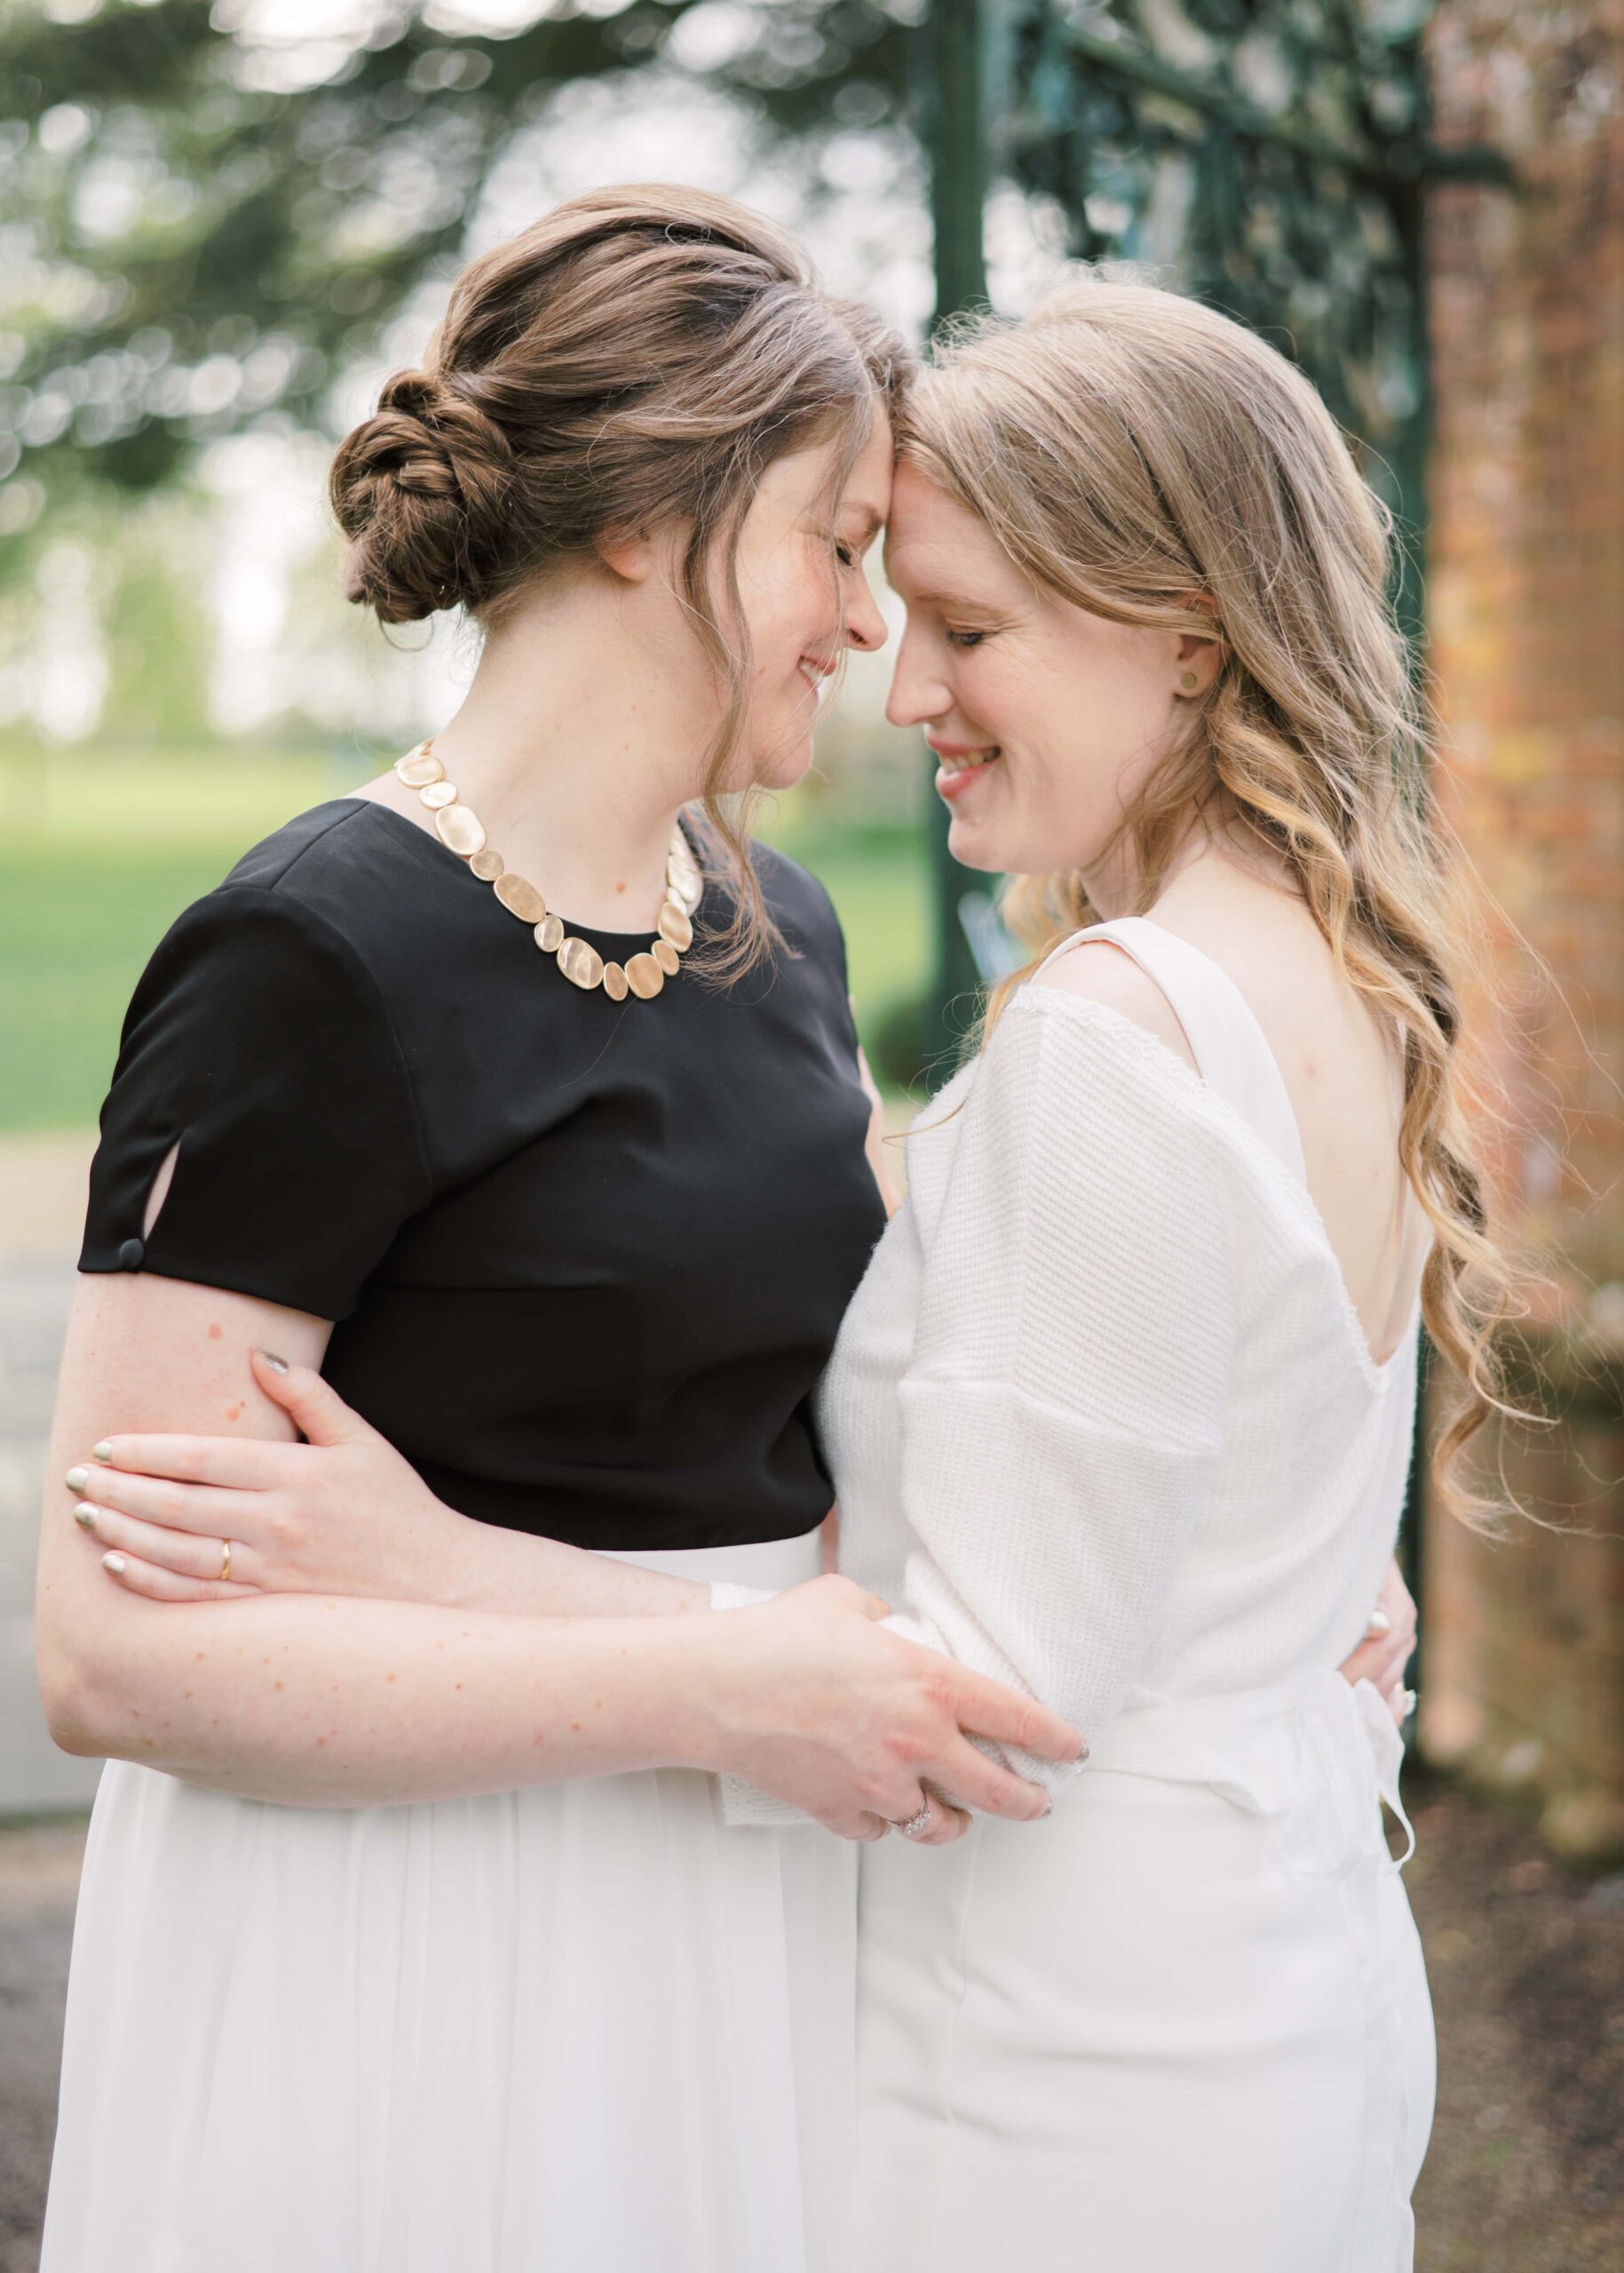 Two brides embrace each other in front of the Walled Garden's main gate.